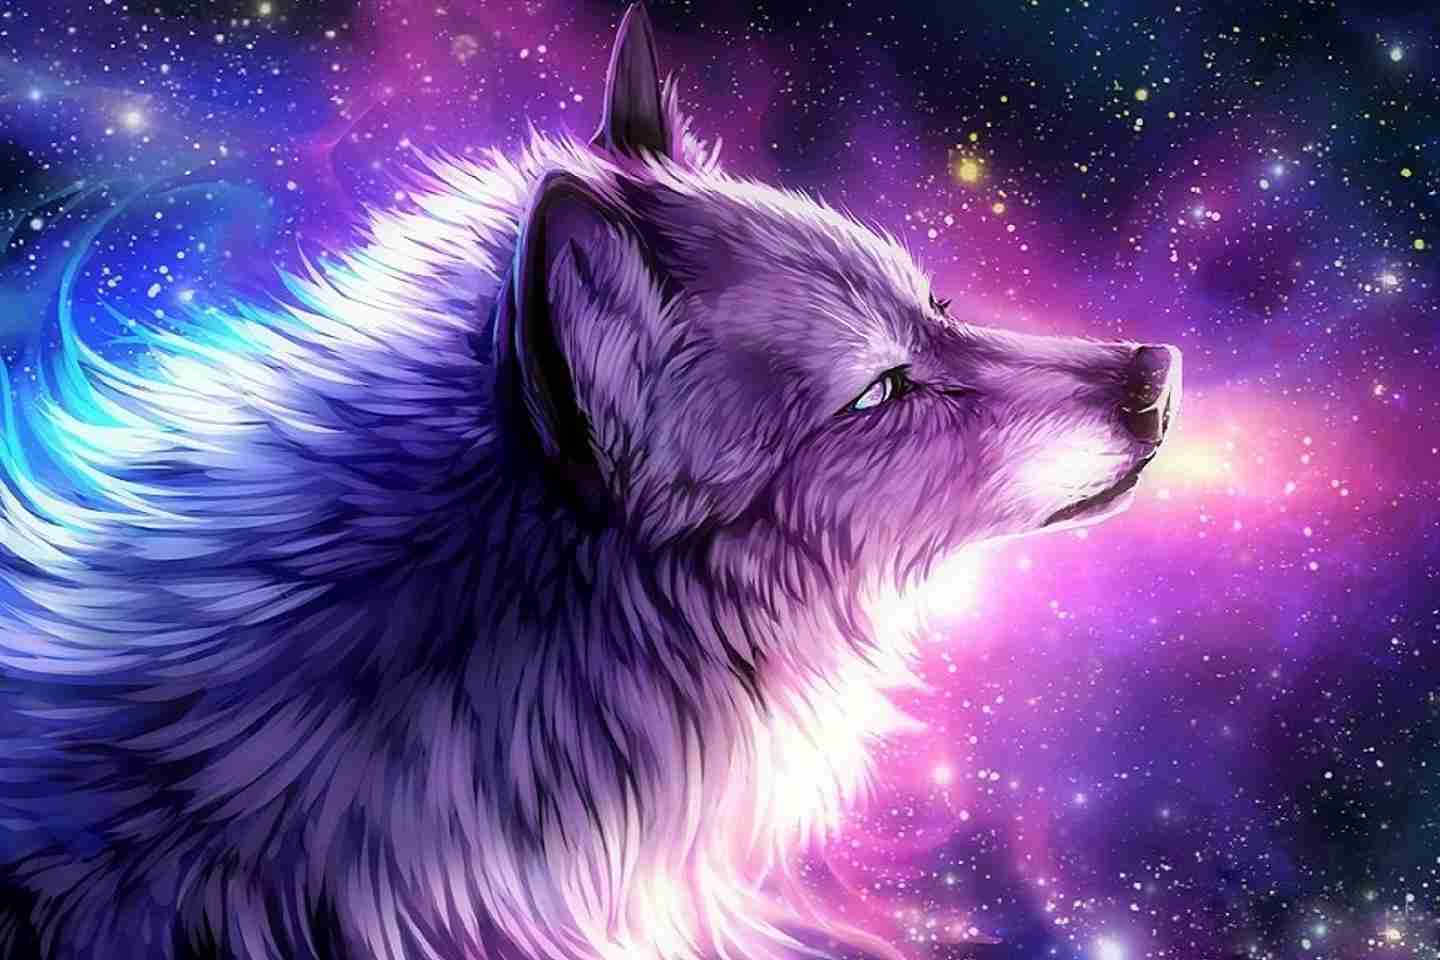 Cute Galaxy Wolf Wallpapers Top Free Cute Galaxy Wolf Backgrounds Wallpaperaccess Find the best wolf wallpaper on wallpapertag. cute galaxy wolf wallpapers top free